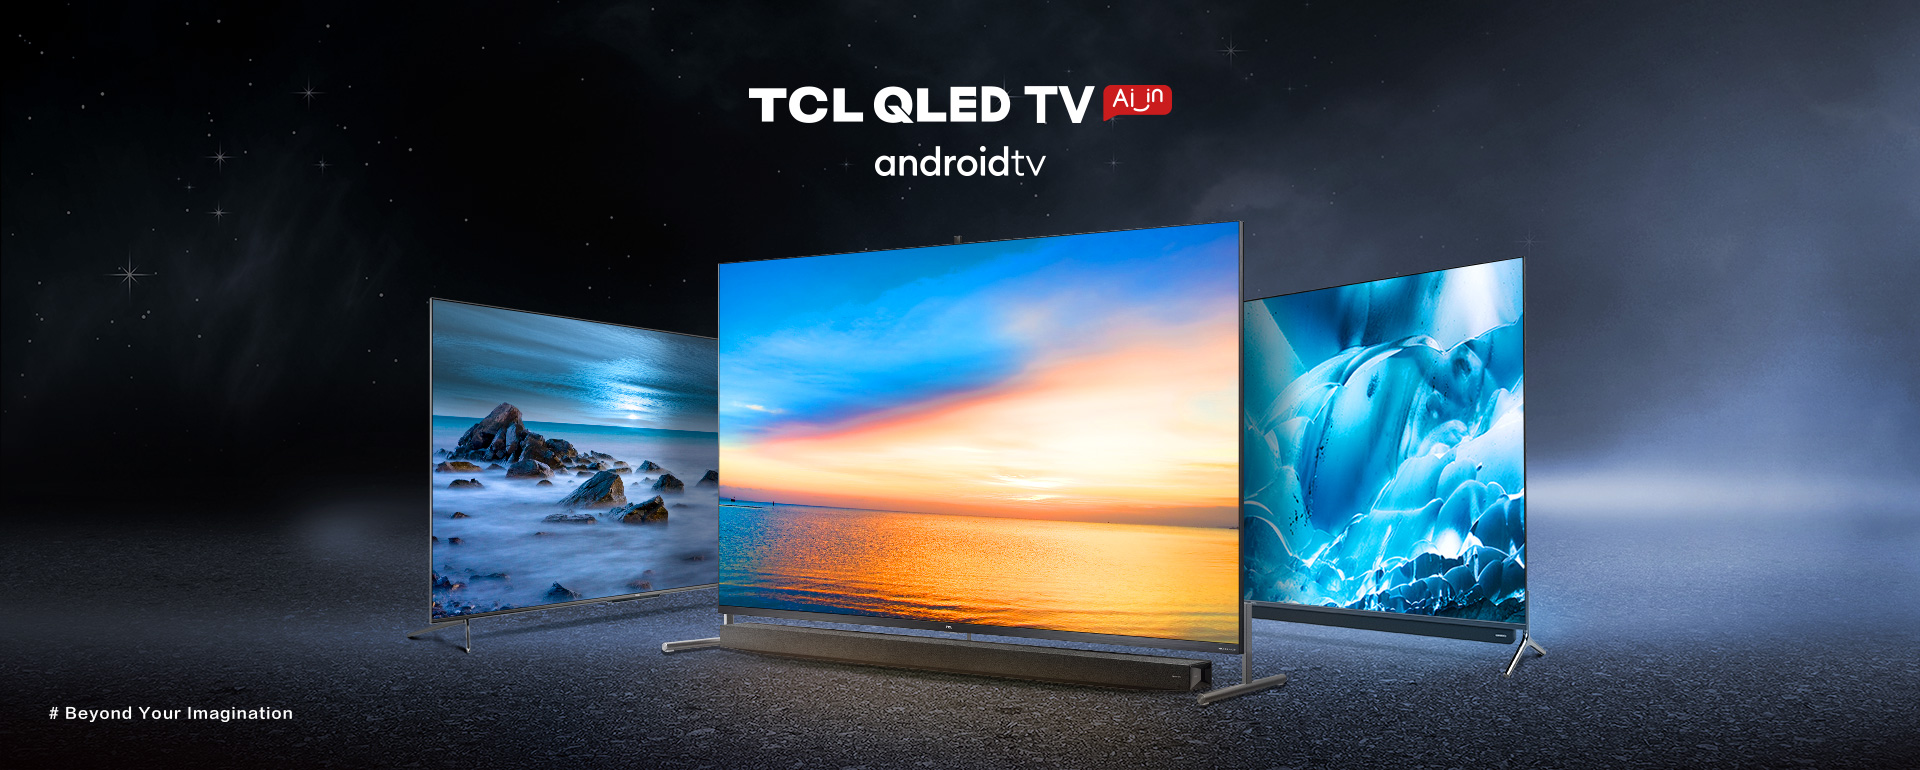 TCL QLED Android TV